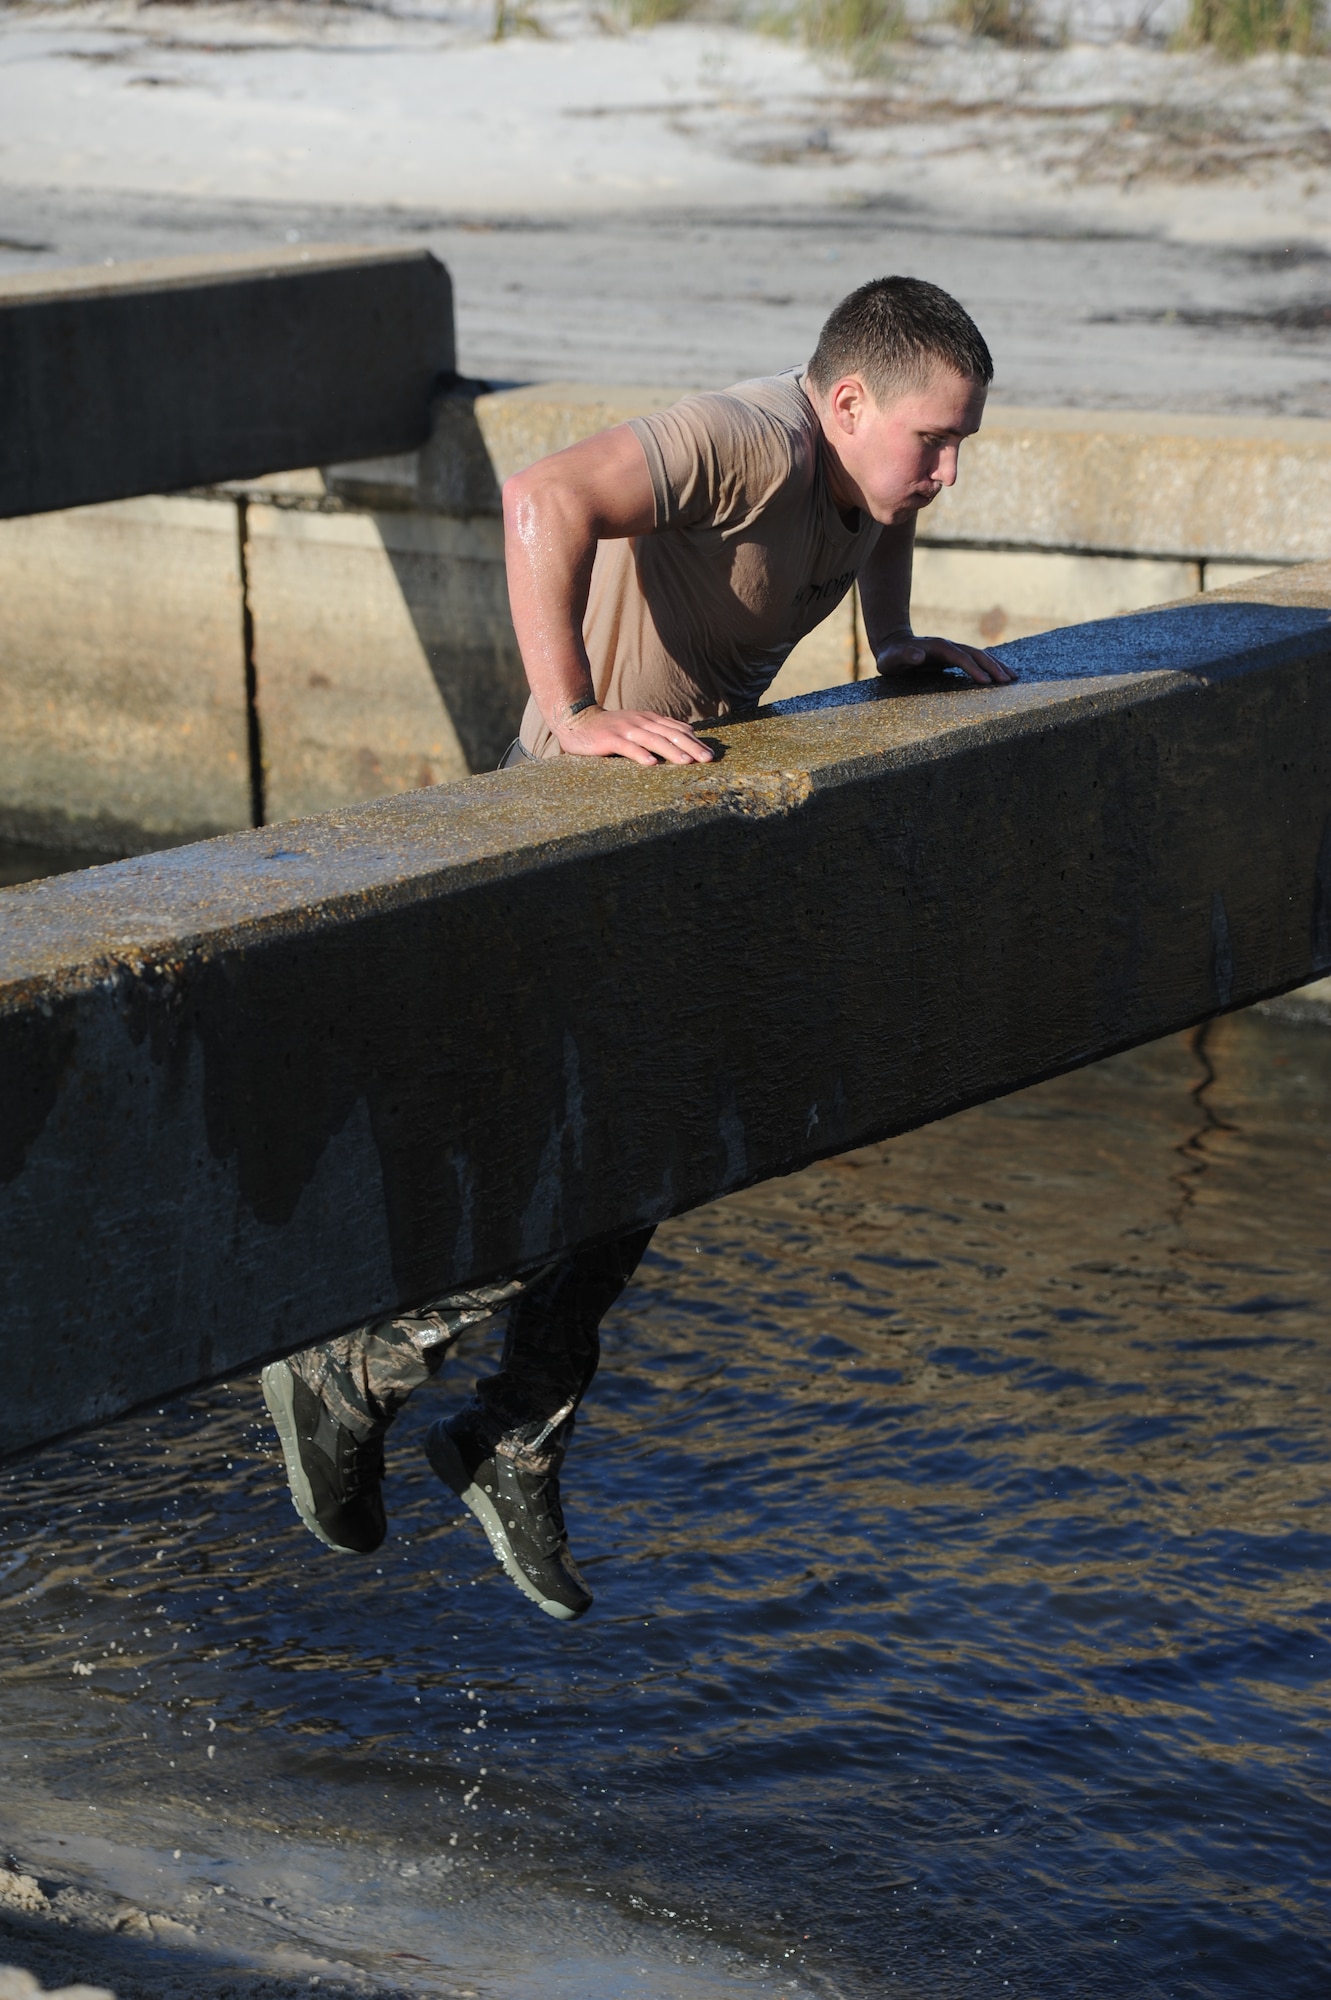 Airman 1st Class Jordan Hathorn, 334th Training Squadron, pulls himself onto a cement pillar during the combat controllers’ physical training session April 12, 2013, on Biloxi beach.  Combat controllers are ground troops who are embedded with special forces teams and provide close-air support for special forces units. While at Keesler, trainees learn how to run, swim, carry a rucksack and conduct air traffic control. These Airmen are prepared physically and mentally for the demands of the combat controller pipeline while earning air traffic control certification in just 15 weeks.  (U.S. Air Force photo by Kemberly Groue)